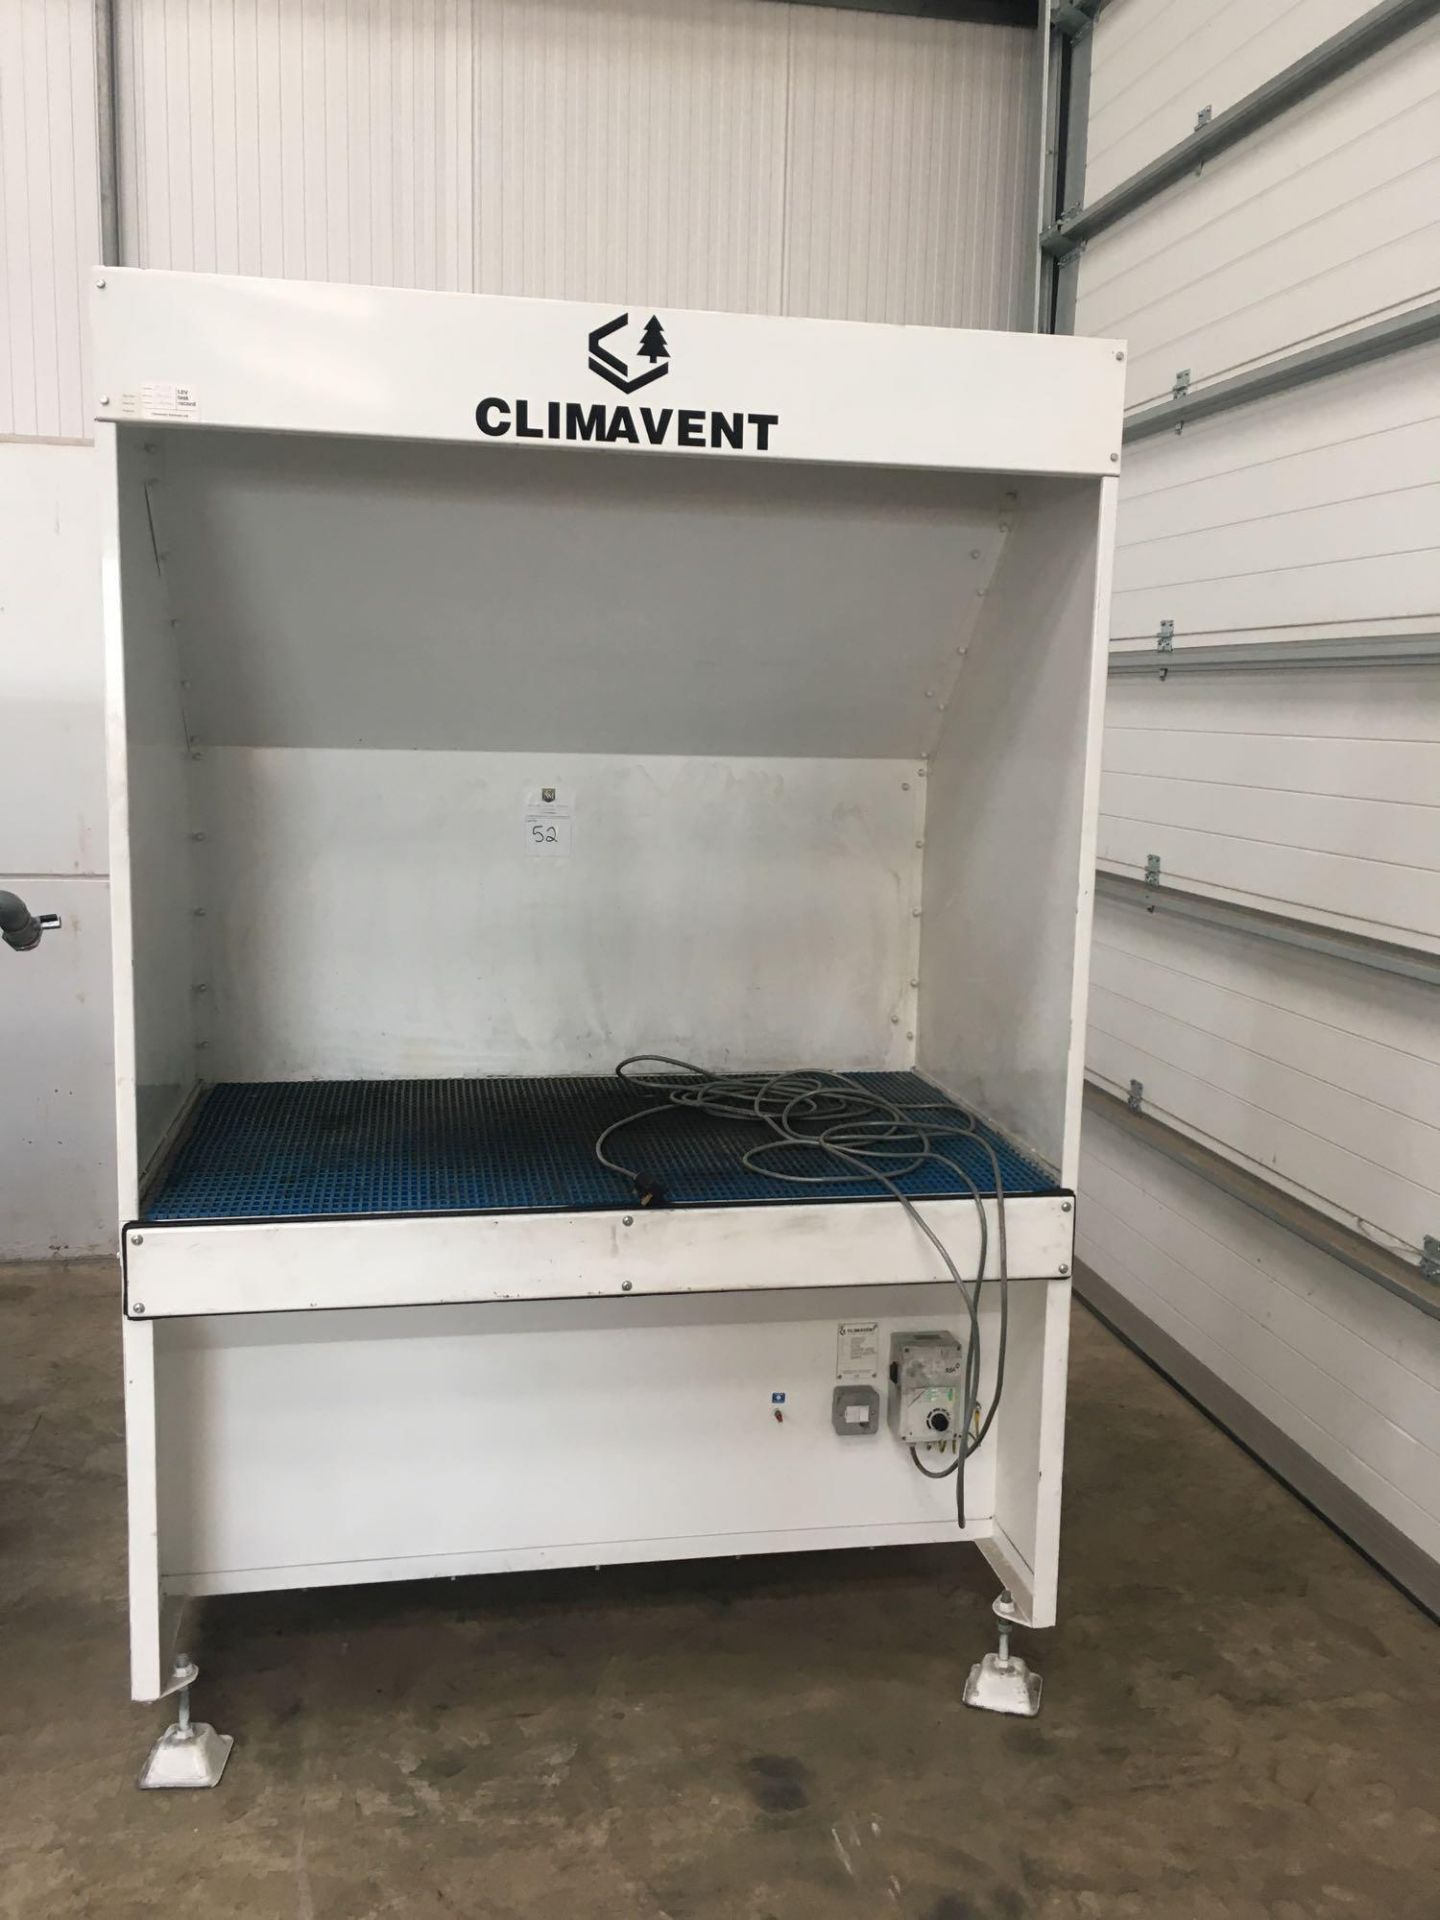 Climavent Downdraft Extractor